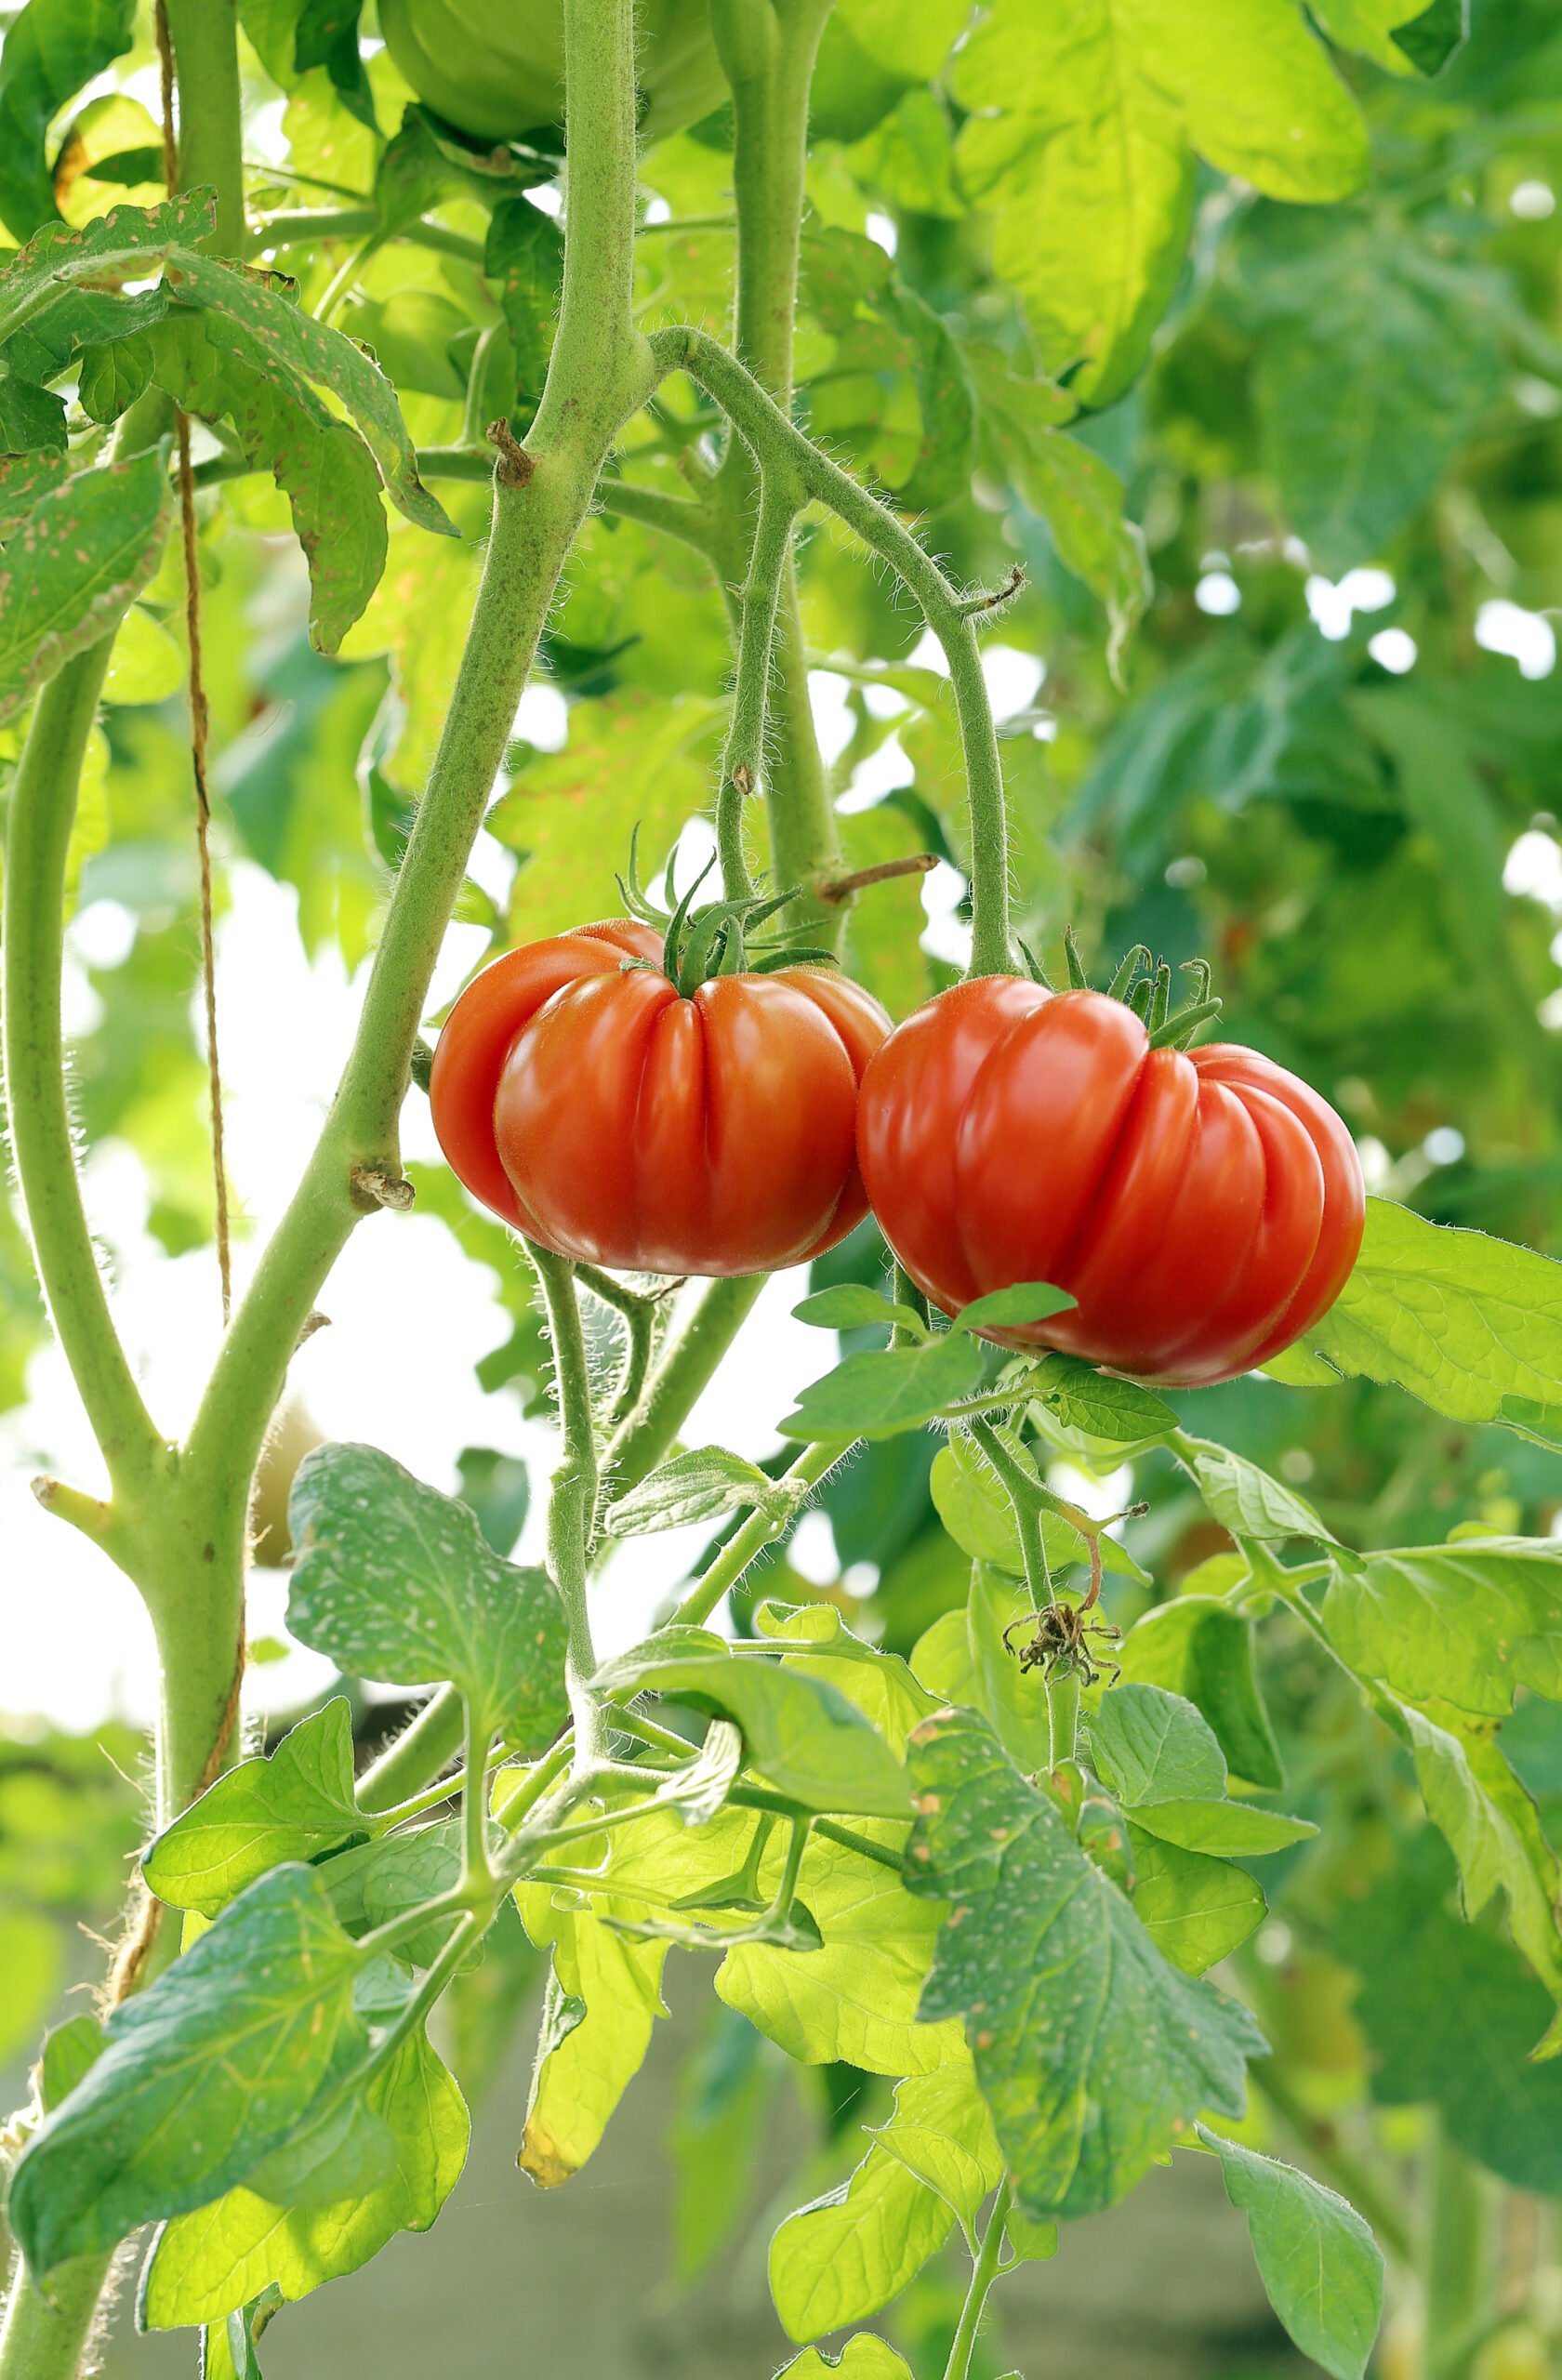 When to Stop Feeding Tomatoes In Pots